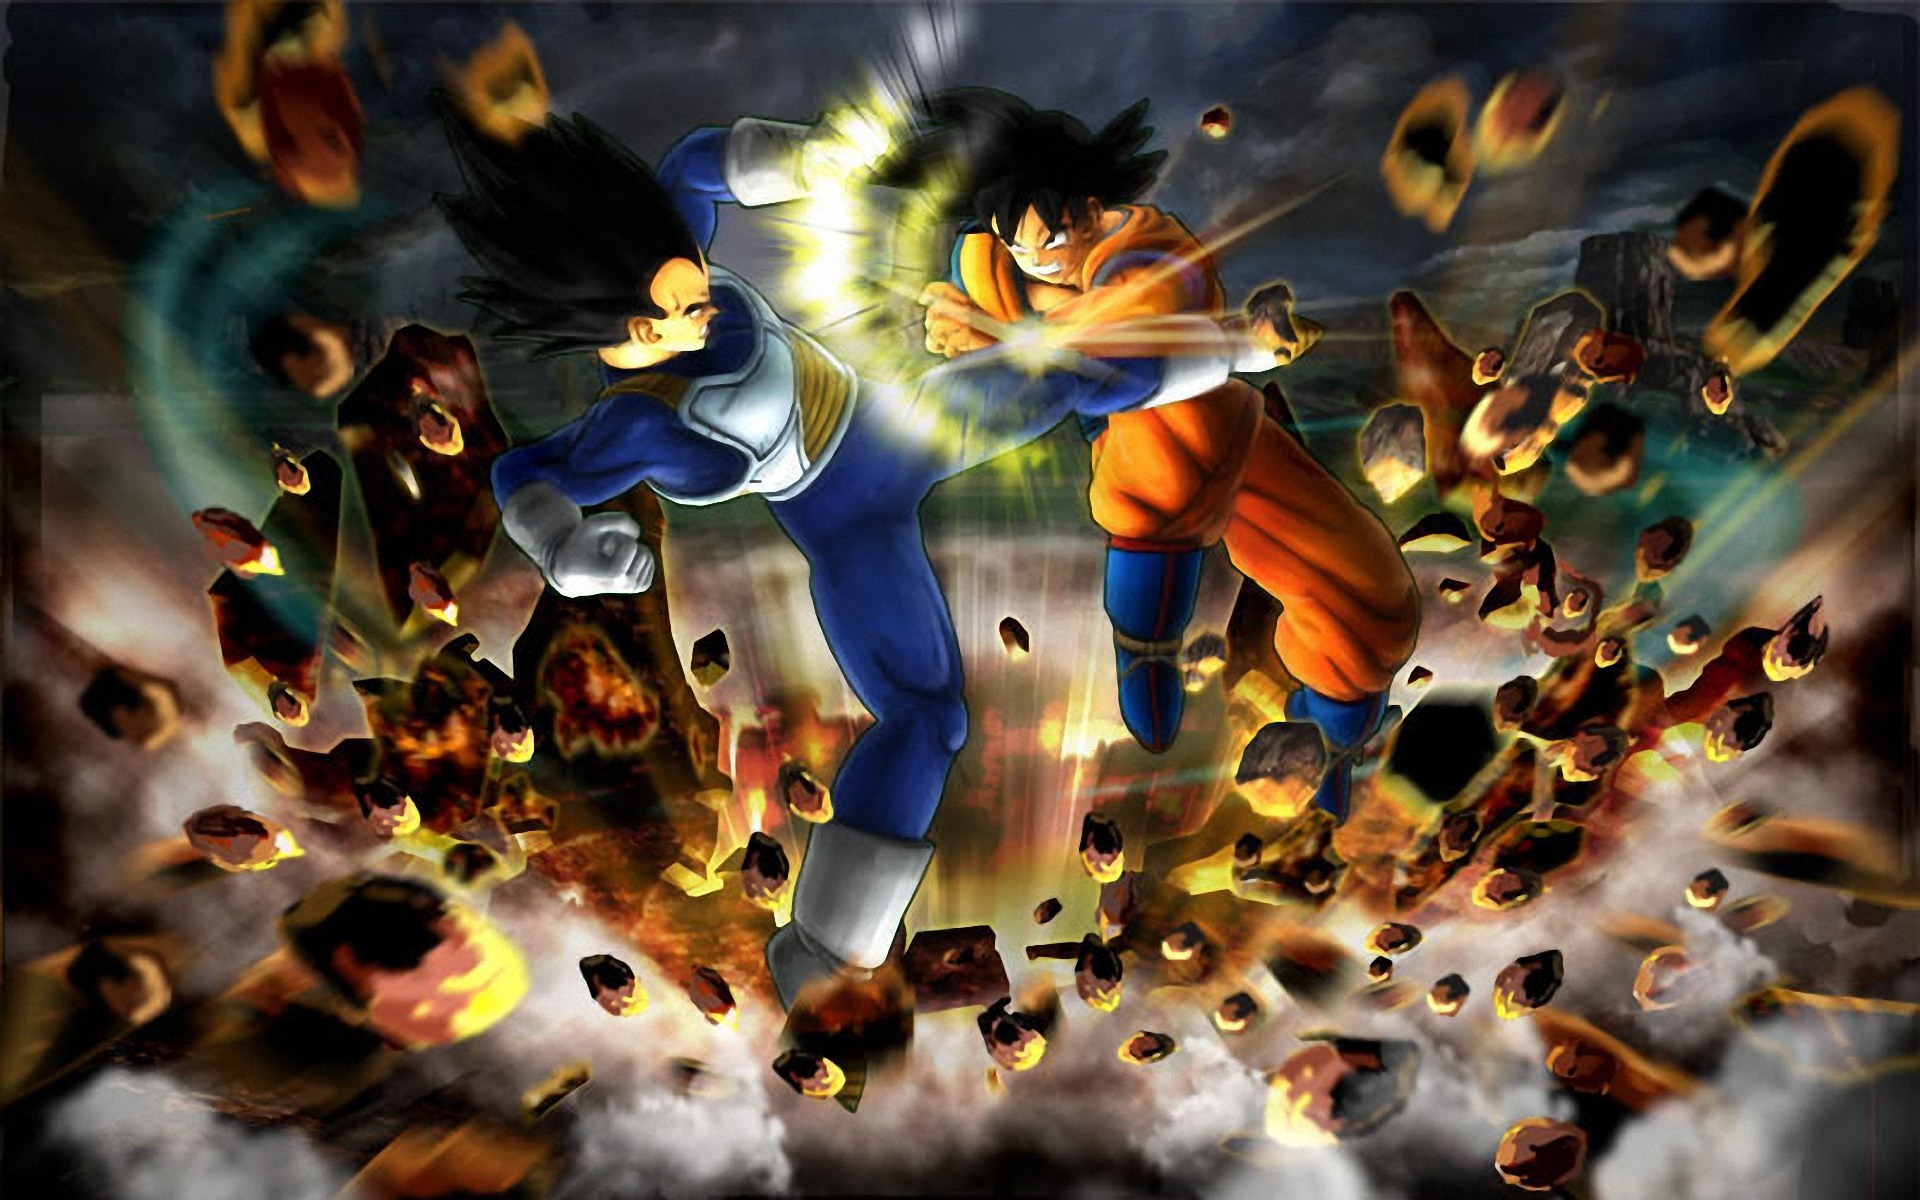 Free download Top Dragon Ball Z Hd Wallpapers For Pc [1920x1080